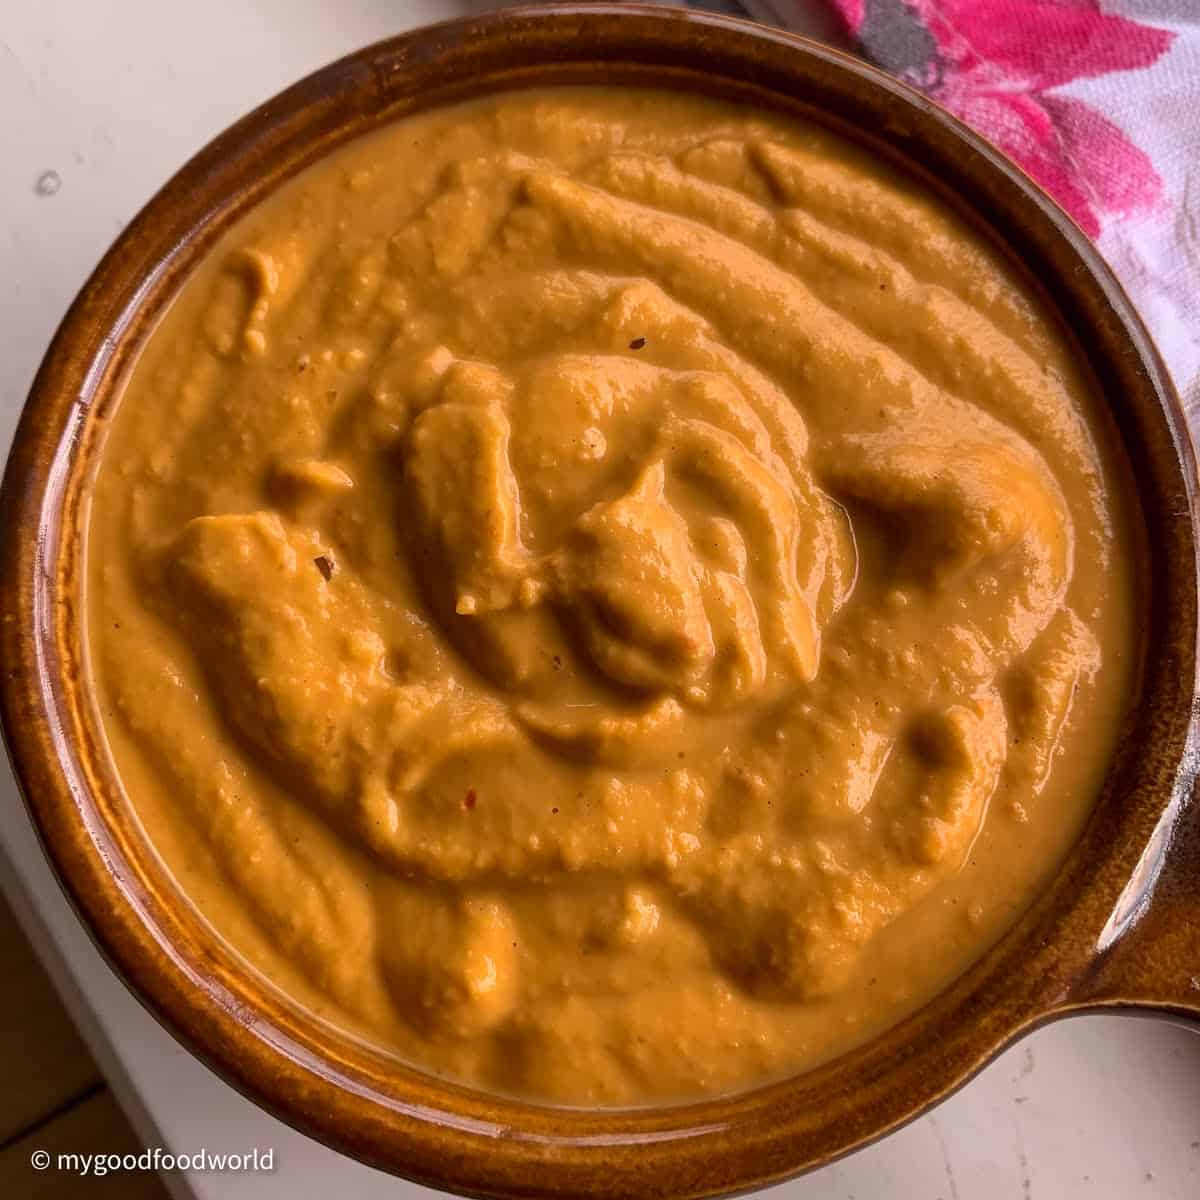 Smooth roasted chana dal chutney is freshly ground and served in a round ceramic bowl with a handle.